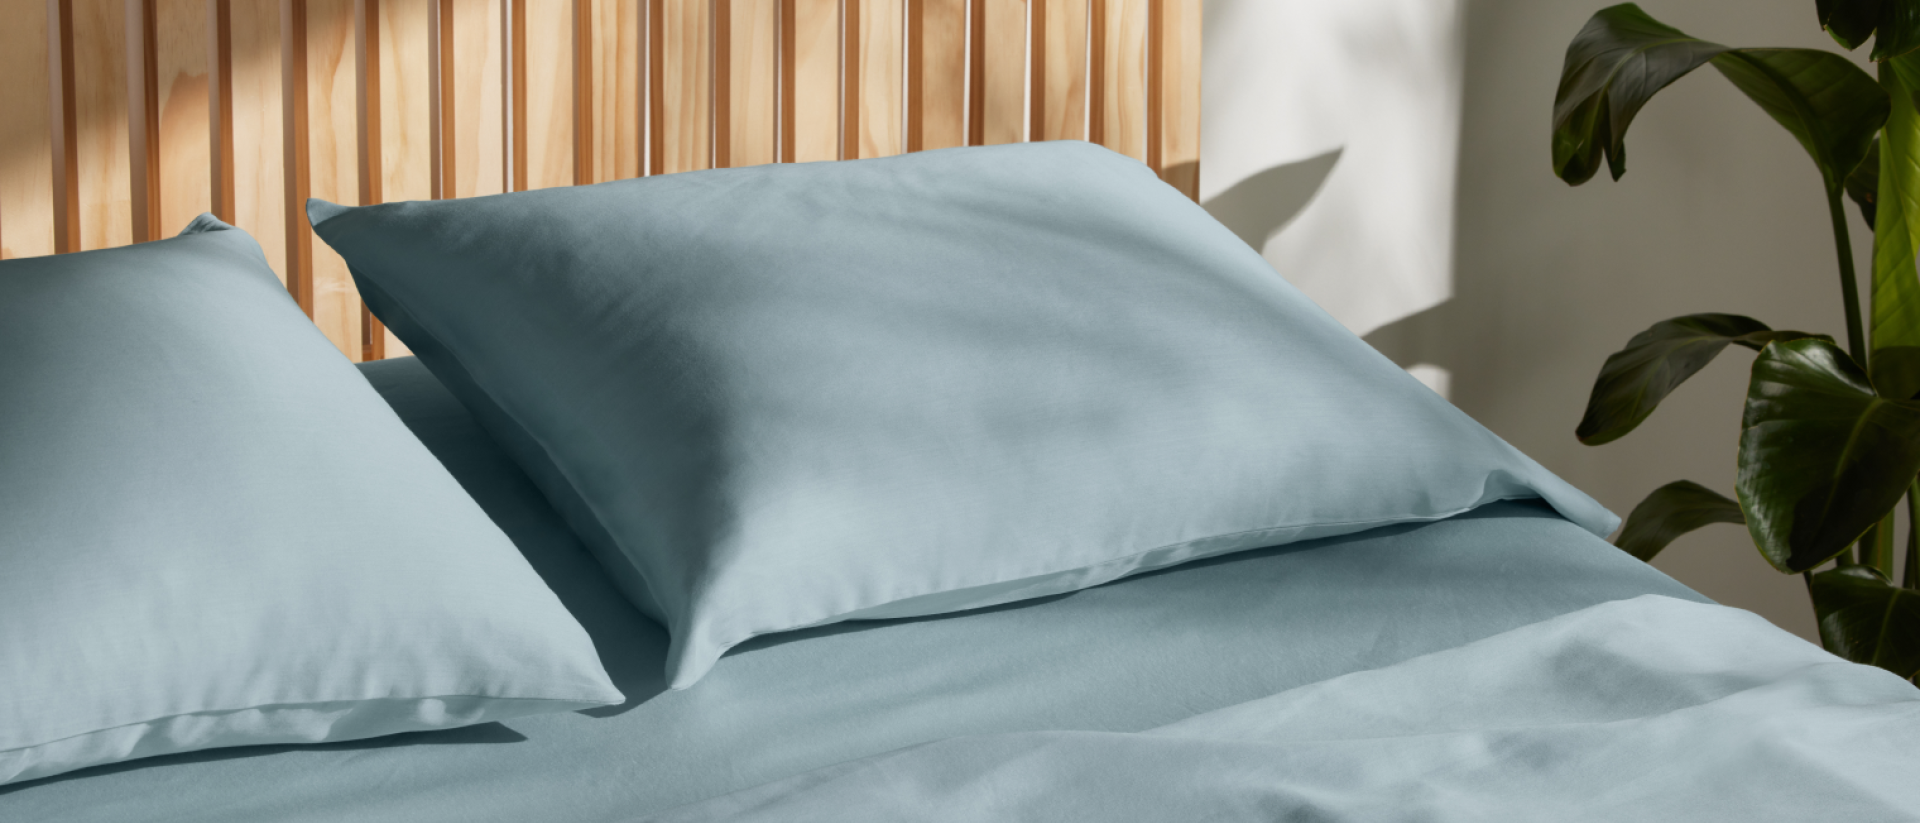 Two pillows on a bed with blue sheets and pillowcases